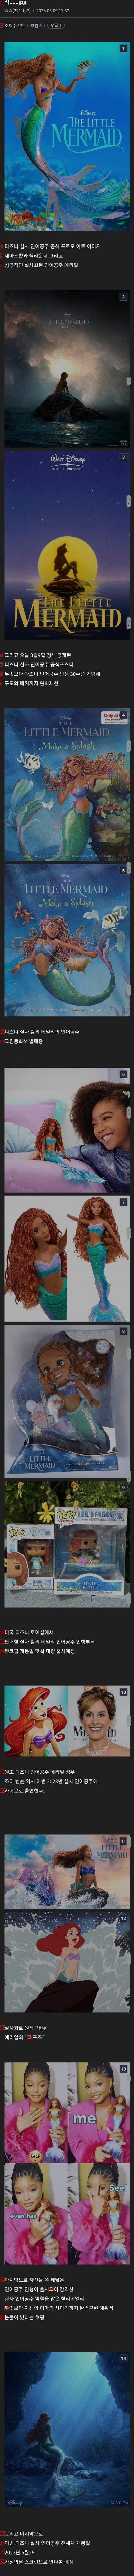 So far, the Little Mermaid has become a reality.